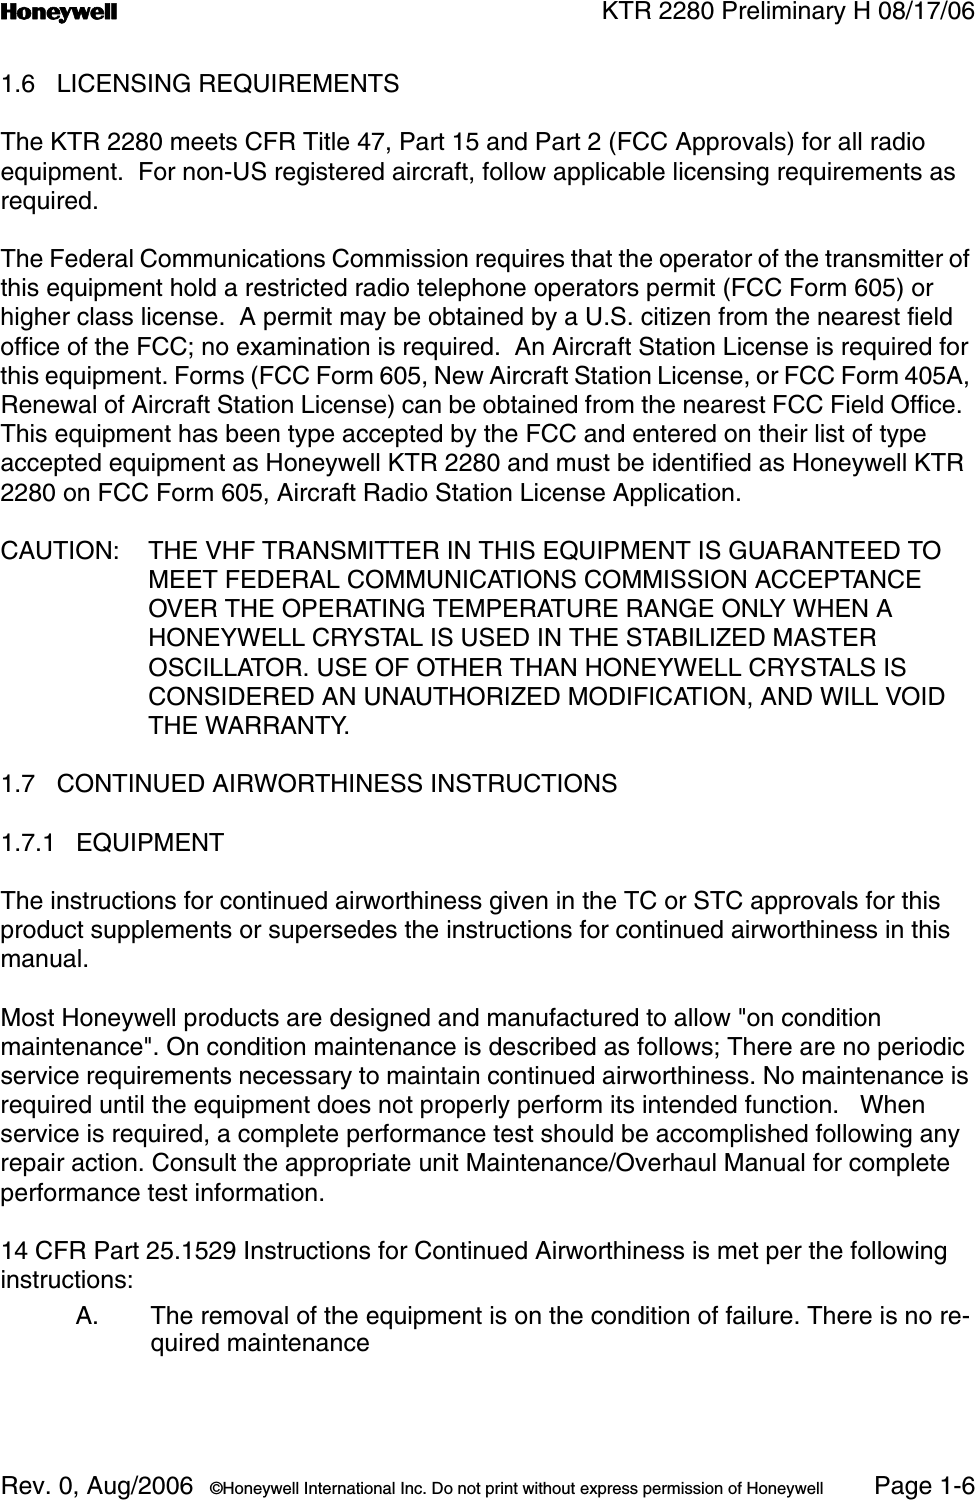 n KTR 2280 Preliminary H 08/17/06Rev. 0, Aug/2006  ©Honeywell International Inc. Do not print without express permission of Honeywell Page 1-61.6 LICENSING REQUIREMENTSThe KTR 2280 meets CFR Title 47, Part 15 and Part 2 (FCC Approvals) for all radio equipment.  For non-US registered aircraft, follow applicable licensing requirements as required.The Federal Communications Commission requires that the operator of the transmitter of this equipment hold a restricted radio telephone operators permit (FCC Form 605) or higher class license.  A permit may be obtained by a U.S. citizen from the nearest field office of the FCC; no examination is required.  An Aircraft Station License is required for this equipment. Forms (FCC Form 605, New Aircraft Station License, or FCC Form 405A, Renewal of Aircraft Station License) can be obtained from the nearest FCC Field Office.  This equipment has been type accepted by the FCC and entered on their list of type accepted equipment as Honeywell KTR 2280 and must be identified as Honeywell KTR 2280 on FCC Form 605, Aircraft Radio Station License Application.CAUTION: THE VHF TRANSMITTER IN THIS EQUIPMENT IS GUARANTEED TO MEET FEDERAL COMMUNICATIONS COMMISSION ACCEPTANCE OVER THE OPERATING TEMPERATURE RANGE ONLY WHEN A HONEYWELL CRYSTAL IS USED IN THE STABILIZED MASTER OSCILLATOR. USE OF OTHER THAN HONEYWELL CRYSTALS IS CONSIDERED AN UNAUTHORIZED MODIFICATION, AND WILL VOID THE WARRANTY.1.7 CONTINUED AIRWORTHINESS INSTRUCTIONS1.7.1 EQUIPMENTThe instructions for continued airworthiness given in the TC or STC approvals for this product supplements or supersedes the instructions for continued airworthiness in this manual.Most Honeywell products are designed and manufactured to allow &quot;on condition maintenance&quot;. On condition maintenance is described as follows; There are no periodic service requirements necessary to maintain continued airworthiness. No maintenance is required until the equipment does not properly perform its intended function.   When service is required, a complete performance test should be accomplished following any repair action. Consult the appropriate unit Maintenance/Overhaul Manual for complete performance test information.14 CFR Part 25.1529 Instructions for Continued Airworthiness is met per the following instructions:A. The removal of the equipment is on the condition of failure. There is no re-quired maintenance